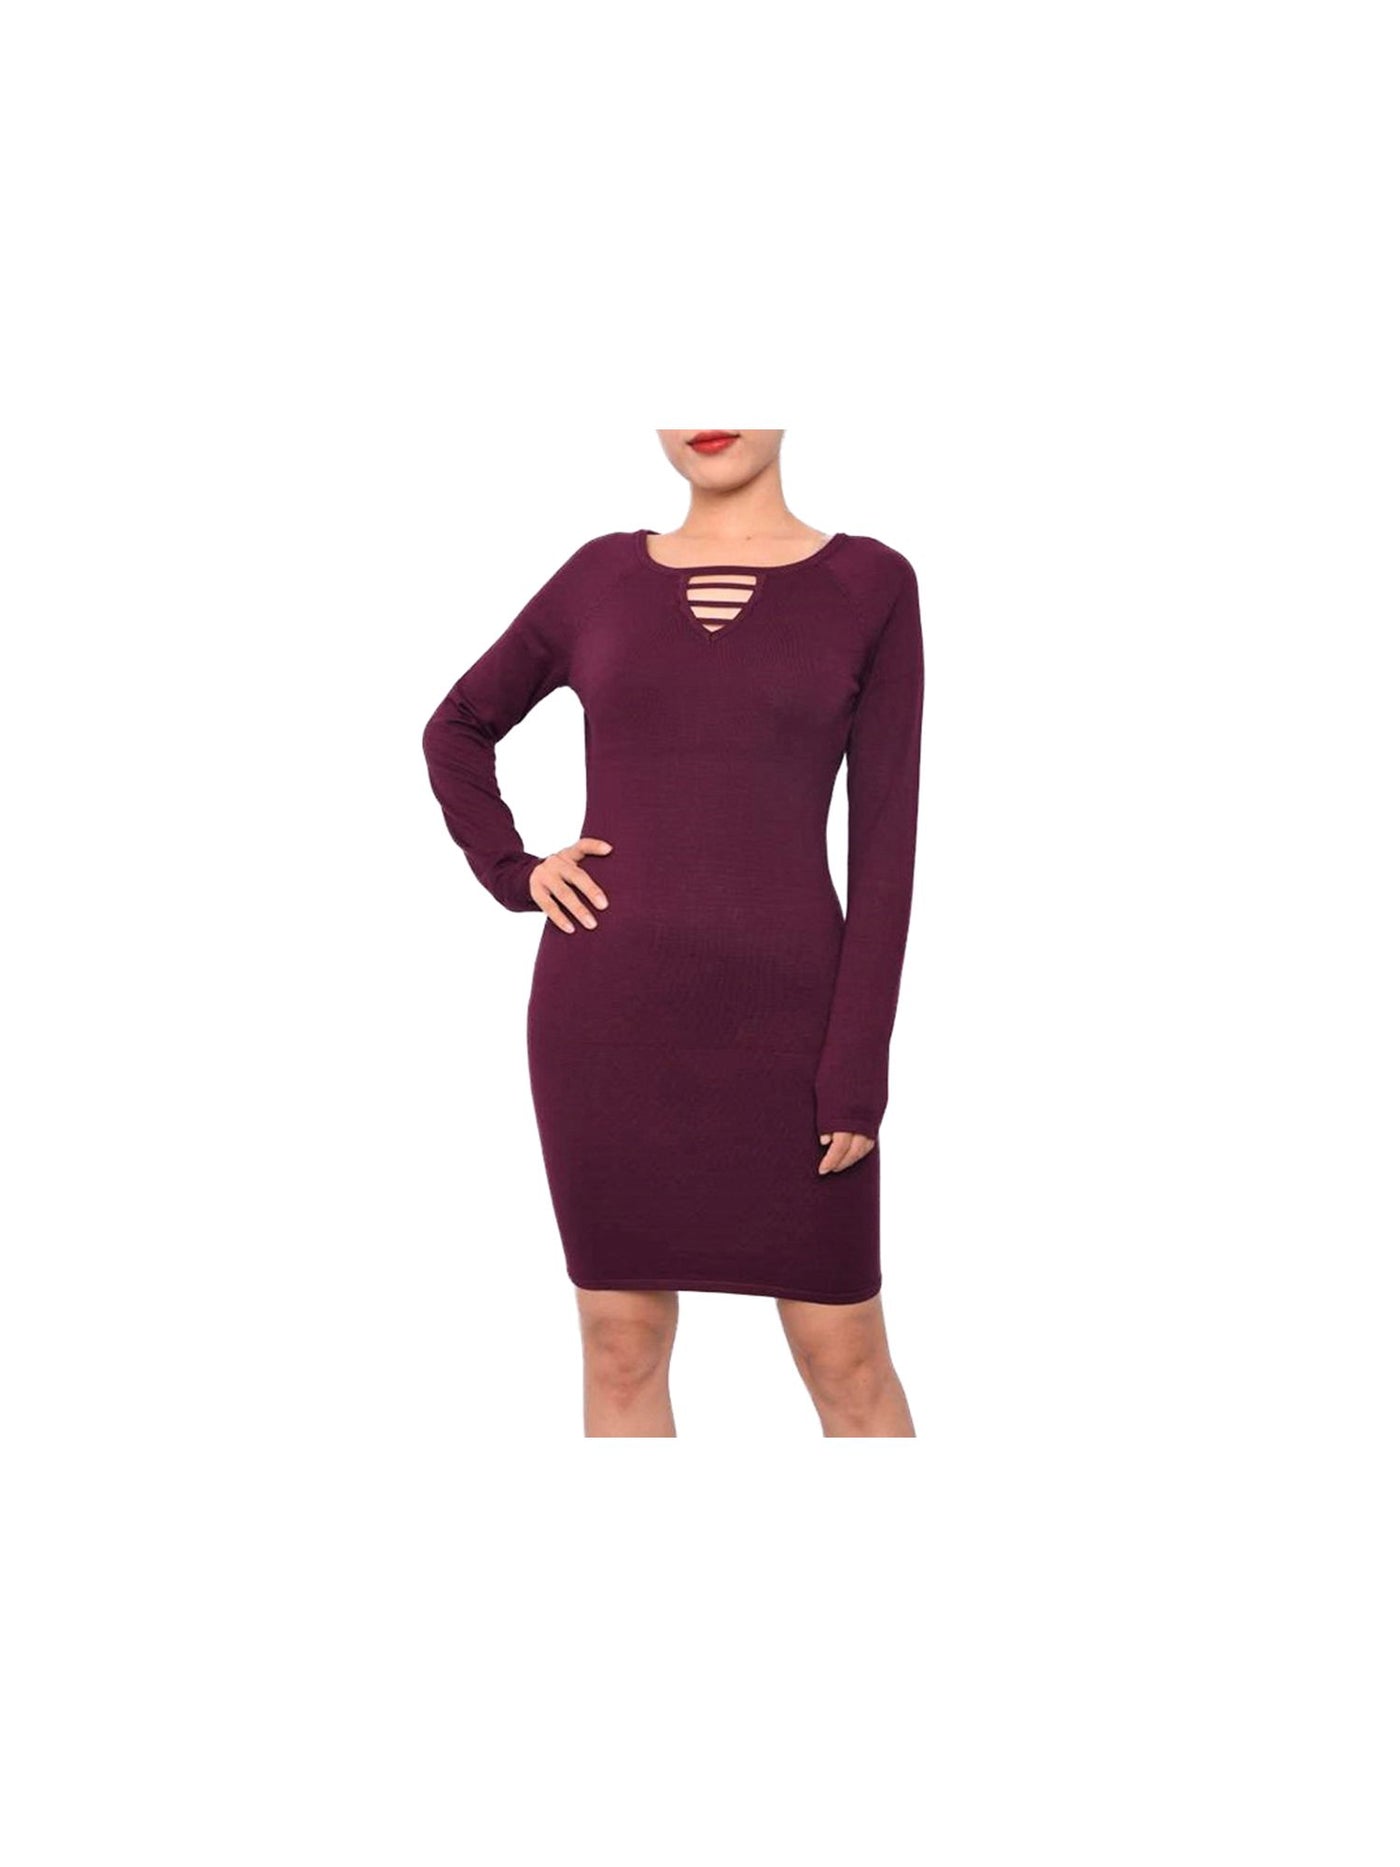 PLANET GOLD Womens Burgundy Long Sleeve Above The Knee Body Con Dress Juniors M